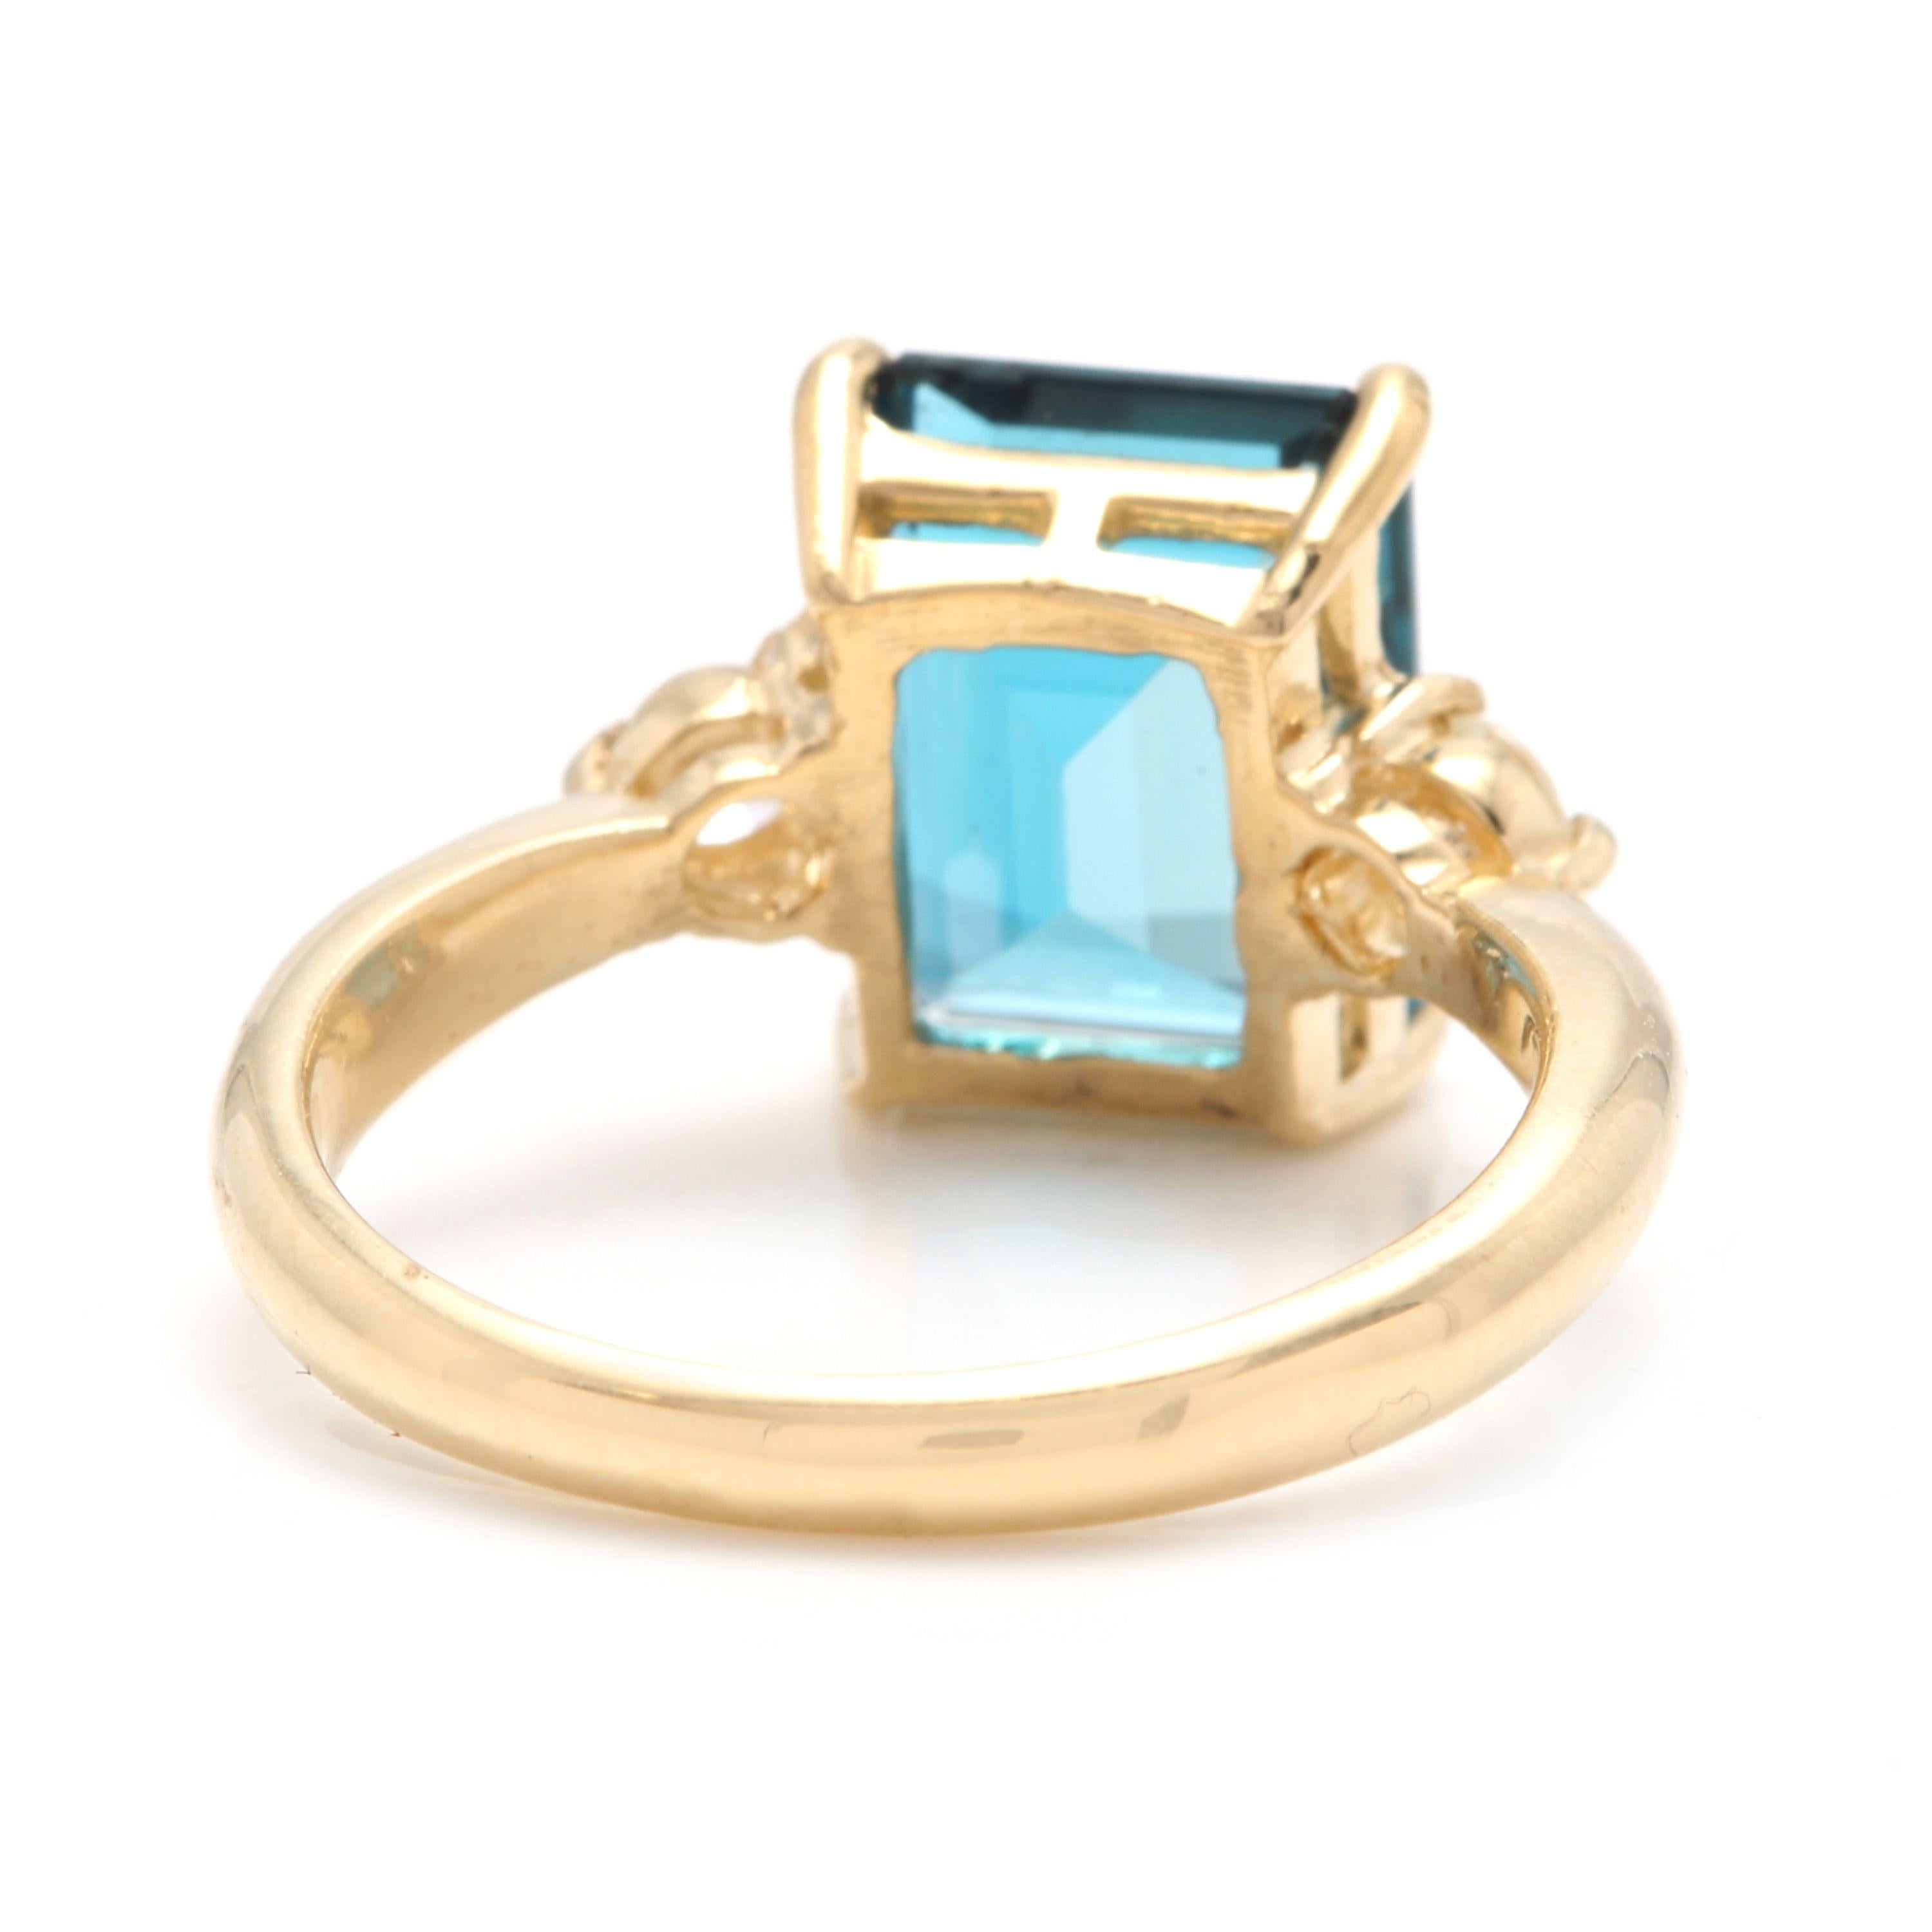 Mixed Cut 3.48 Carat Impressive Natural London Blue Topaz and Diamond 14K Yellow Gold Ring For Sale